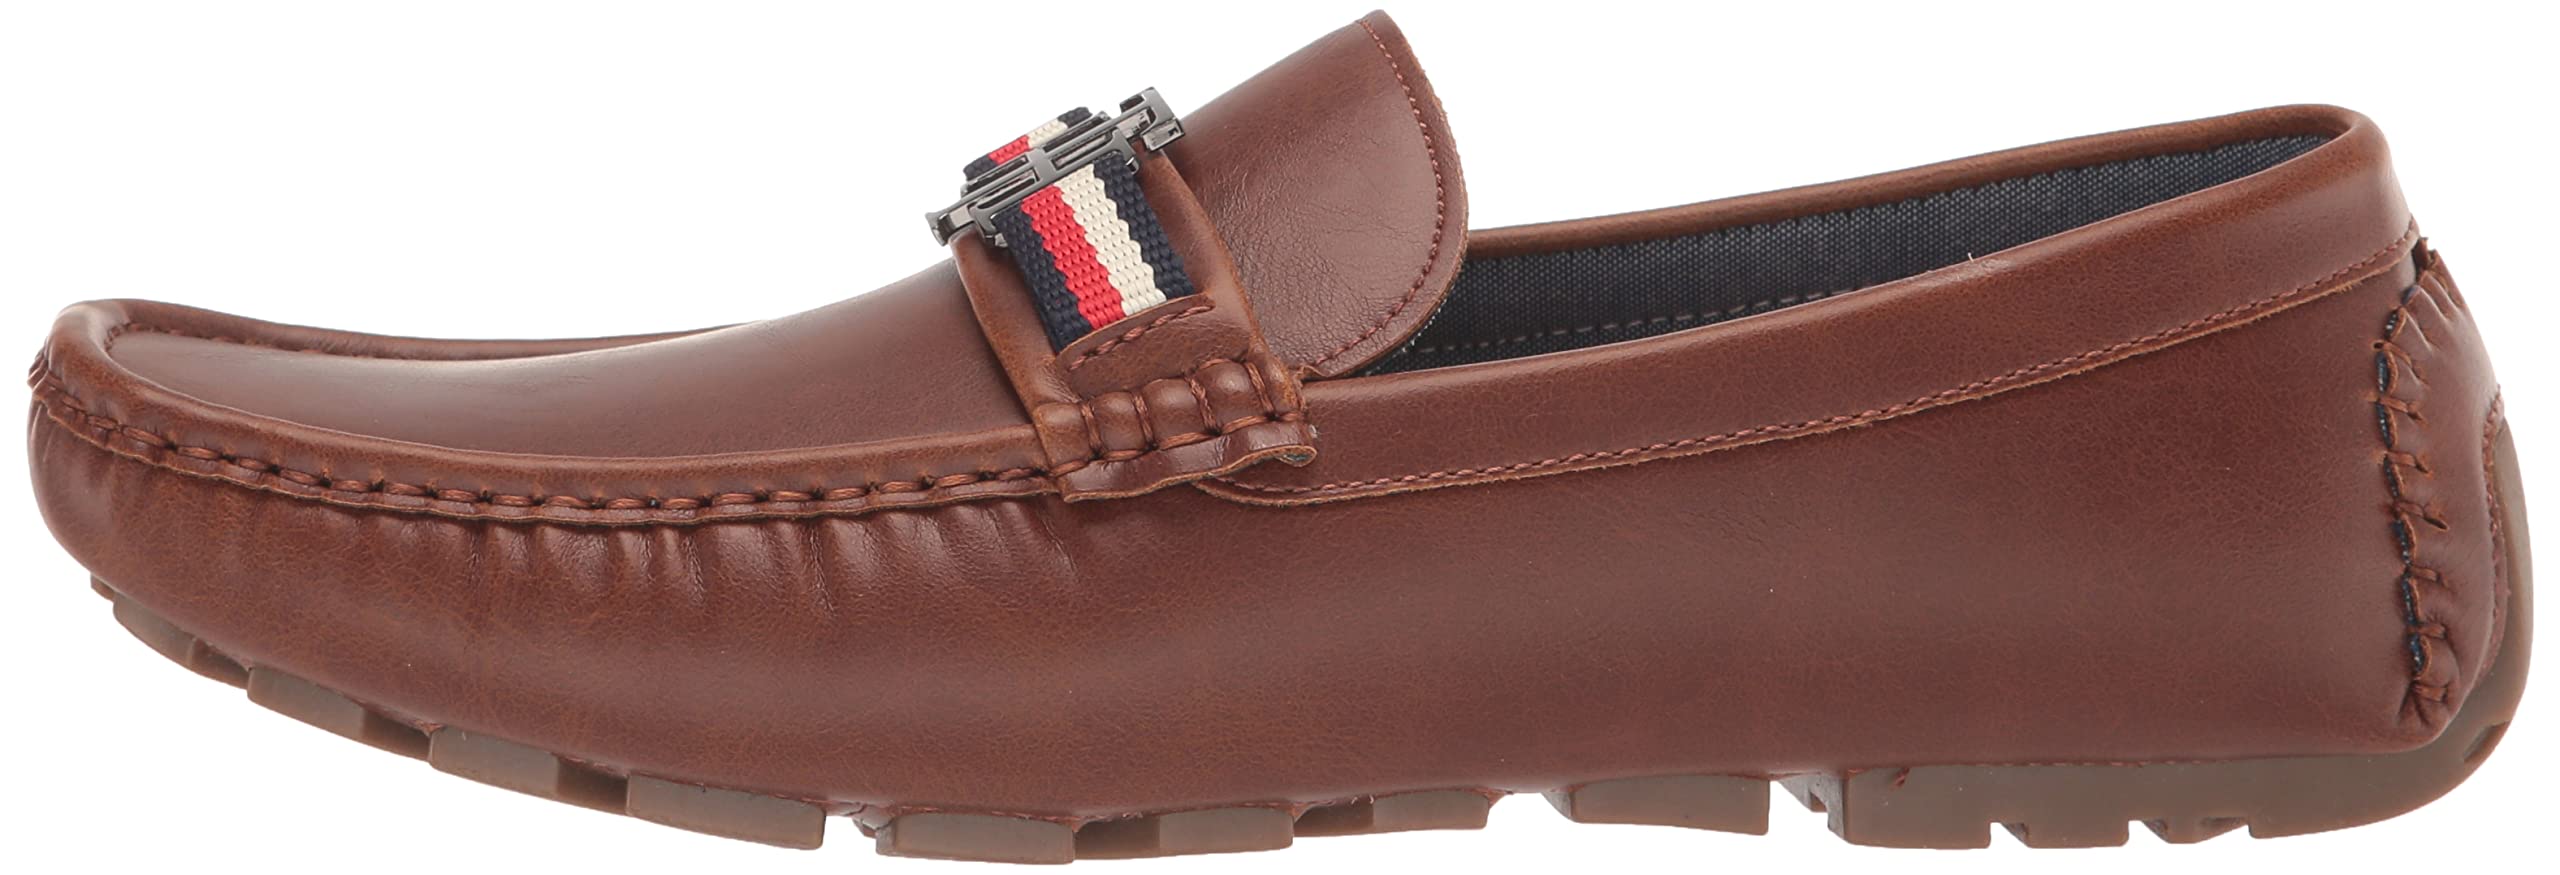 Tommy Hilfiger Men's Atino Driving Style Loafer